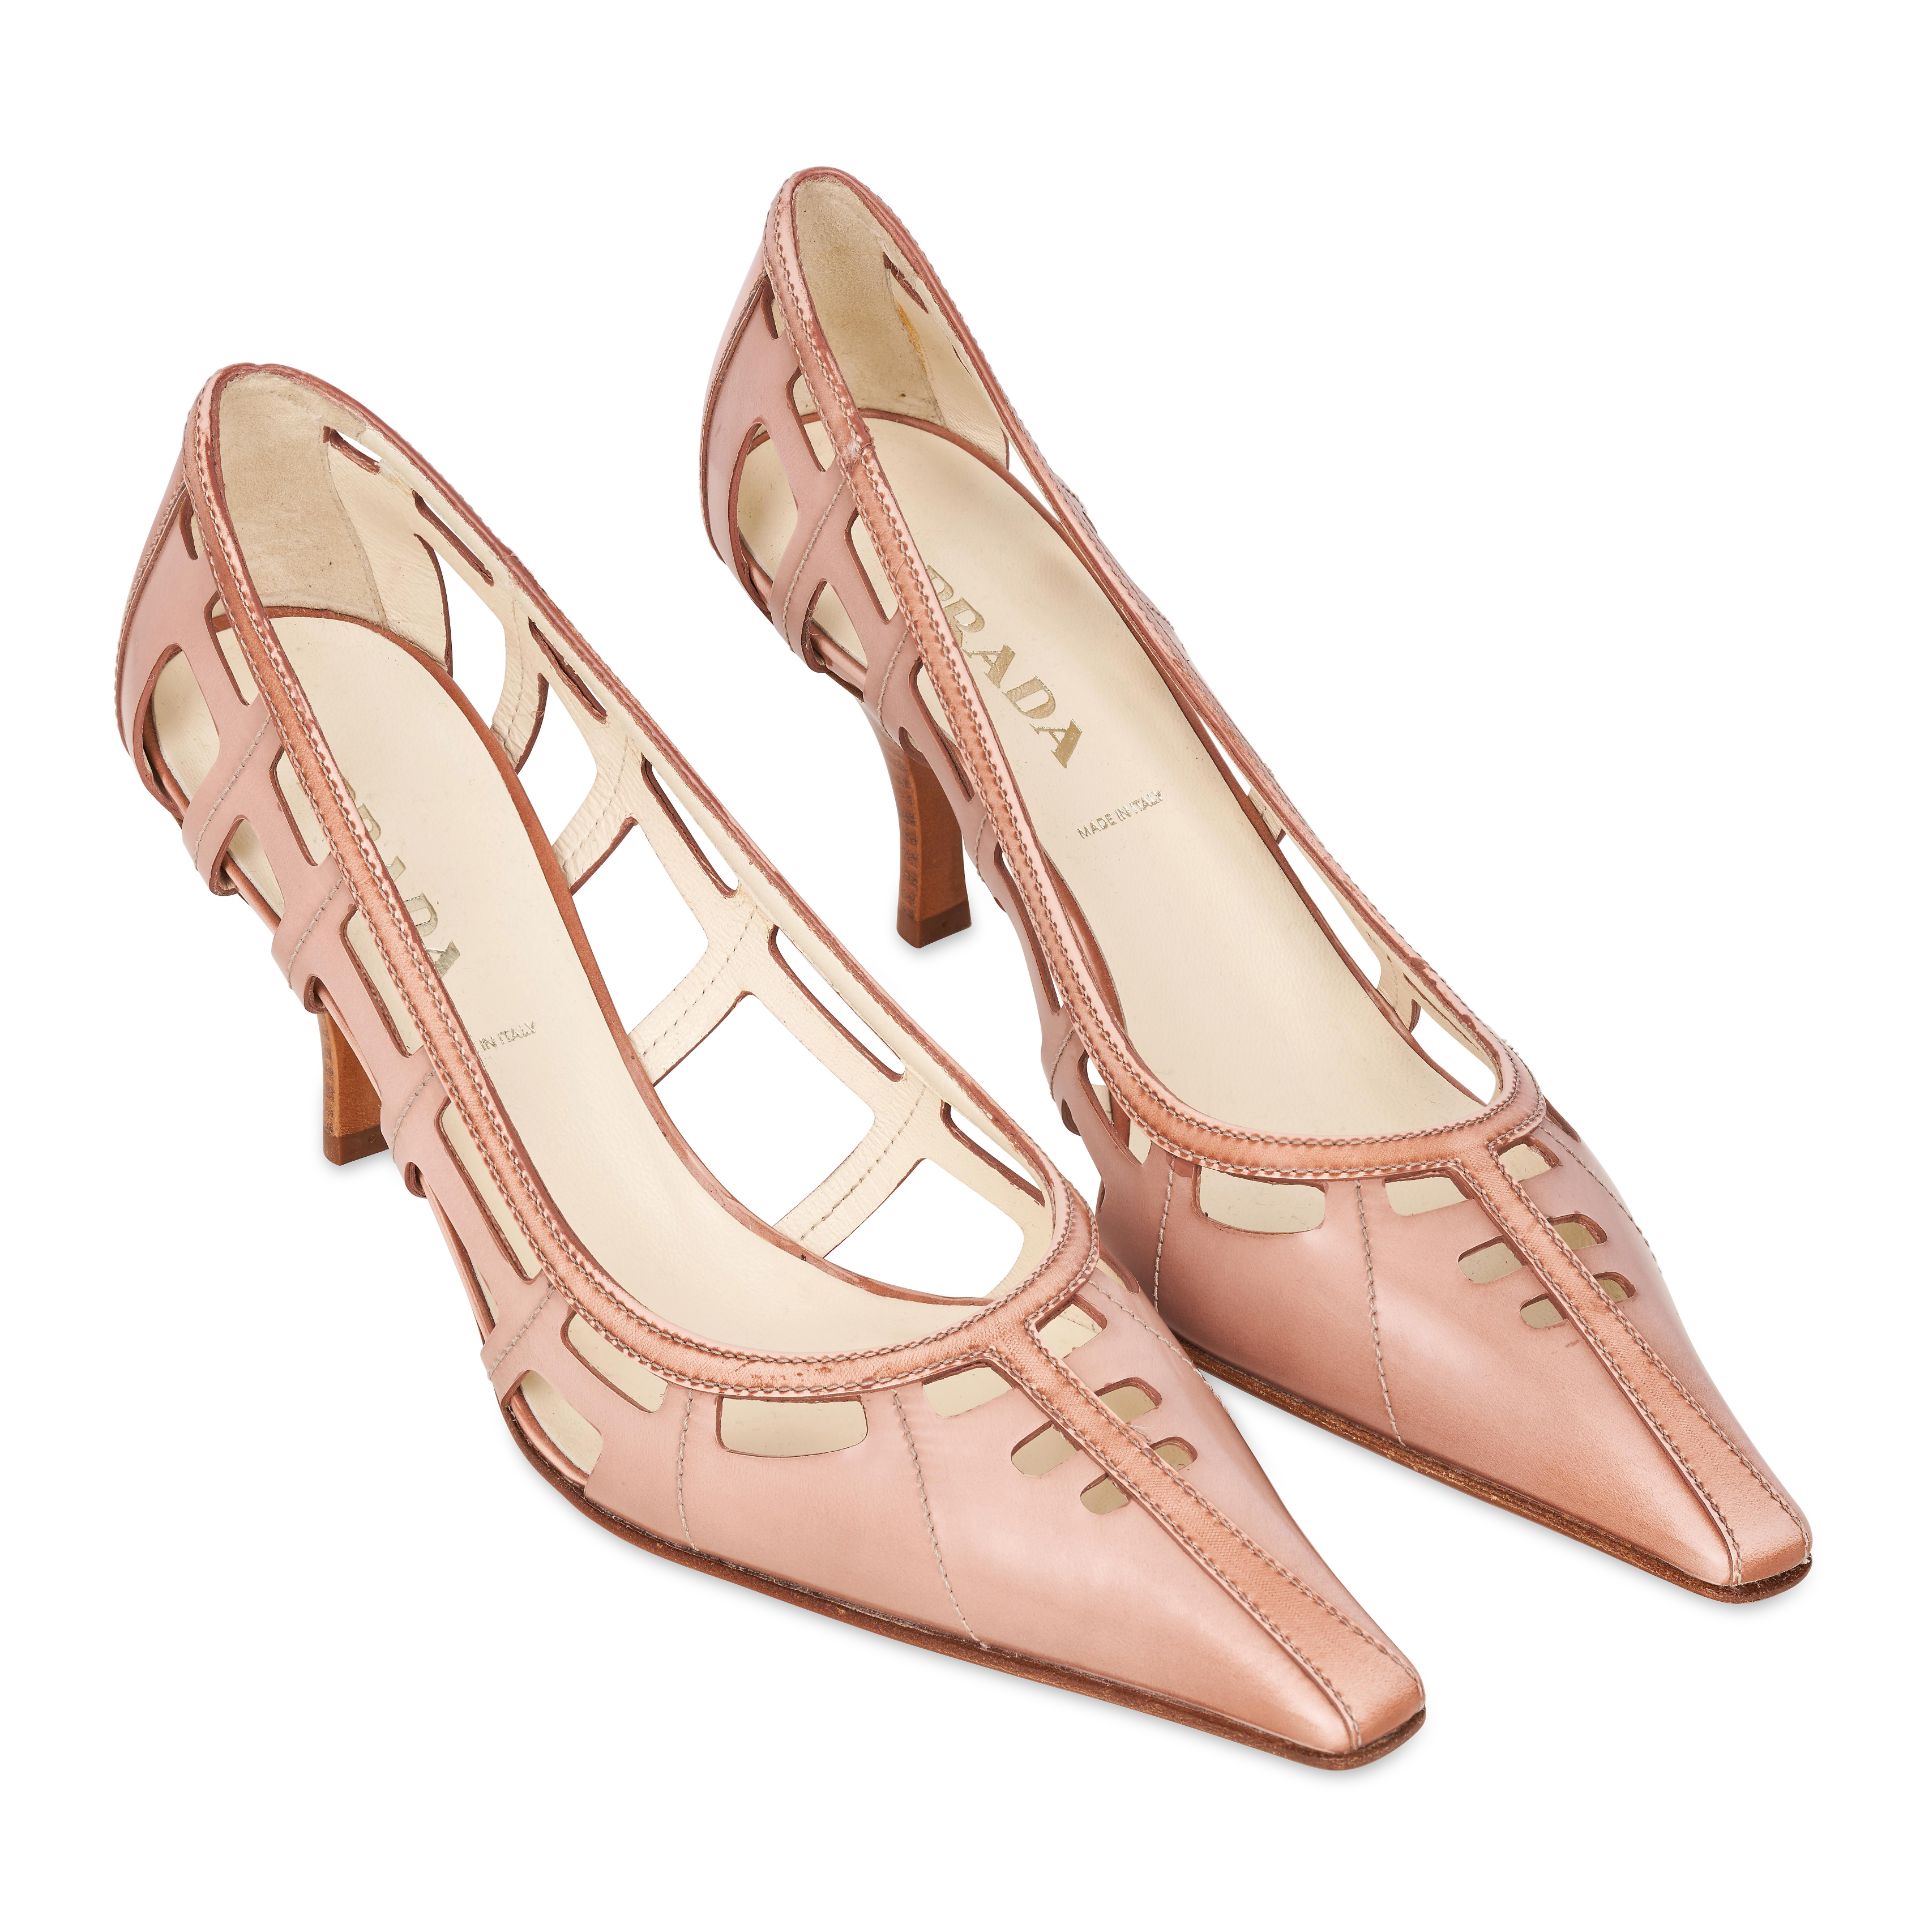 PRADA PINK POINTED HEELS Condition grade A. Size 36.5. Heel height 8cm. Pink toned patent leath...